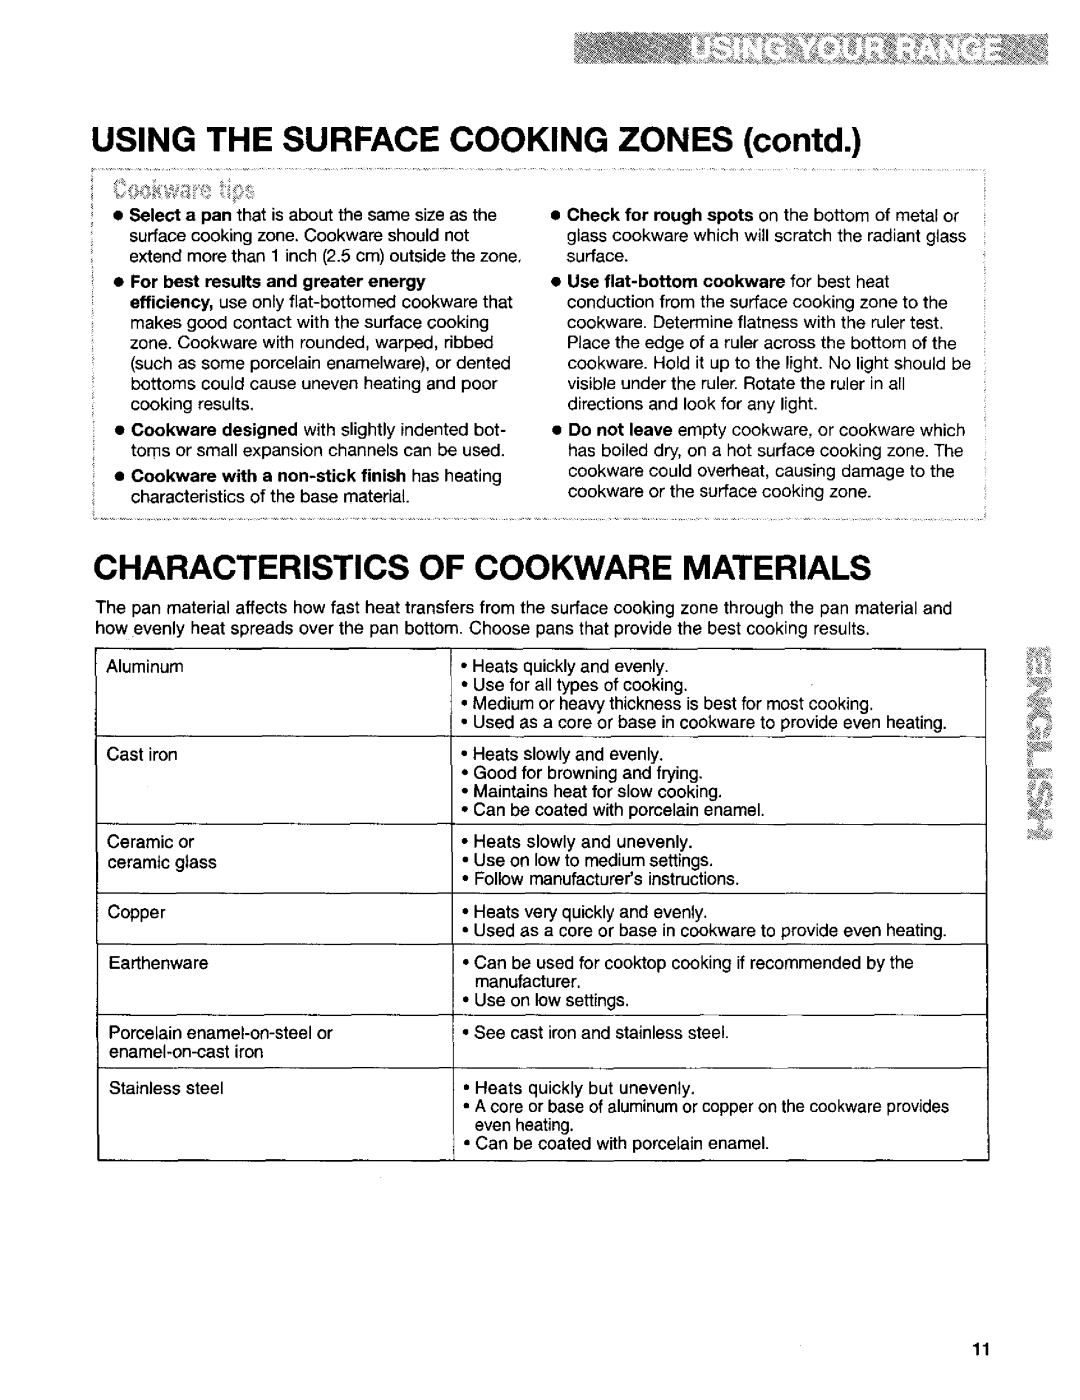 Kenmore 665.95829, 665.95822, 665.95824 manual Characteristics Of Cookware Materials, USING THE SURFACE COOKING ZONES contd 